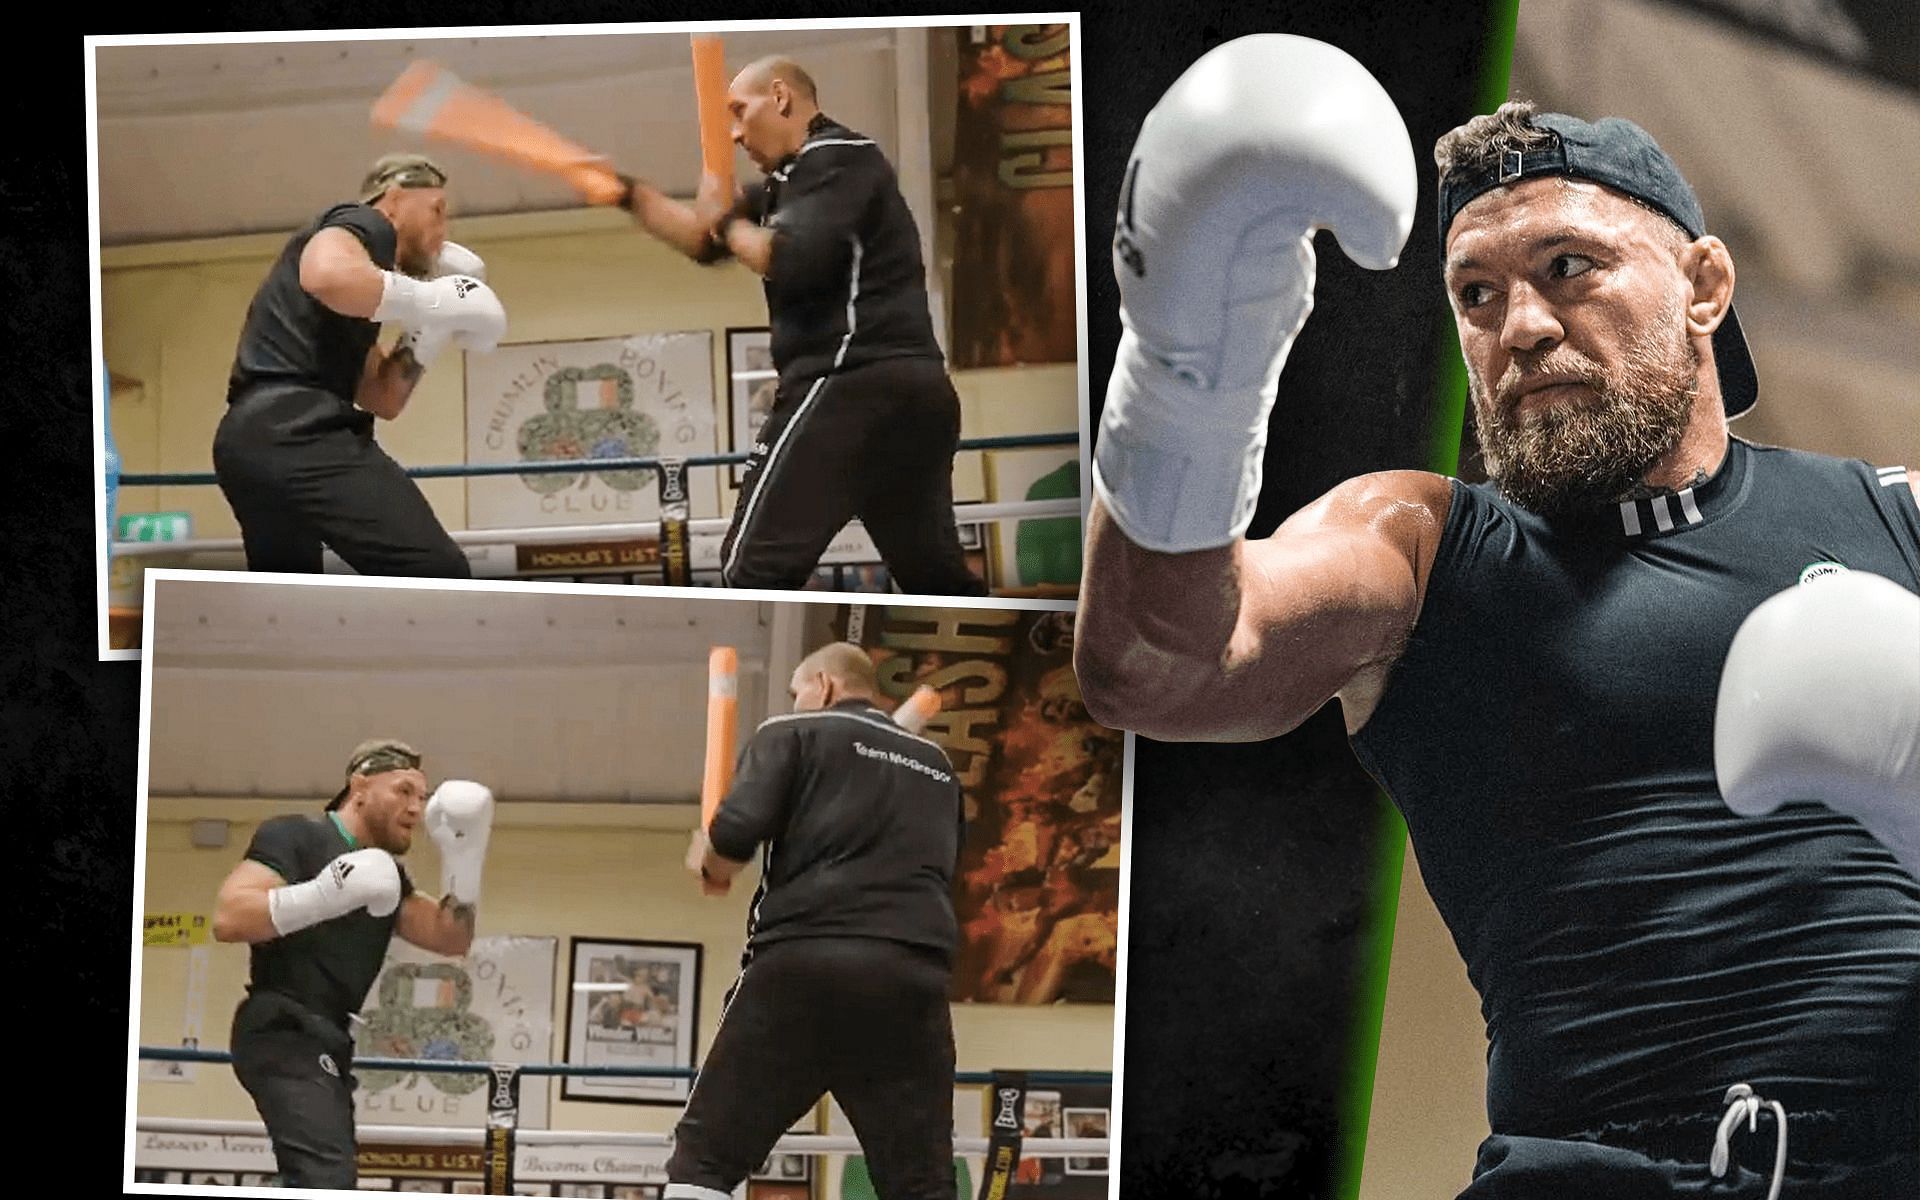 Conor McGregor training images (Left) and McGregor (Right) (Image courtesy: via Instagram @thenotoriousmma)